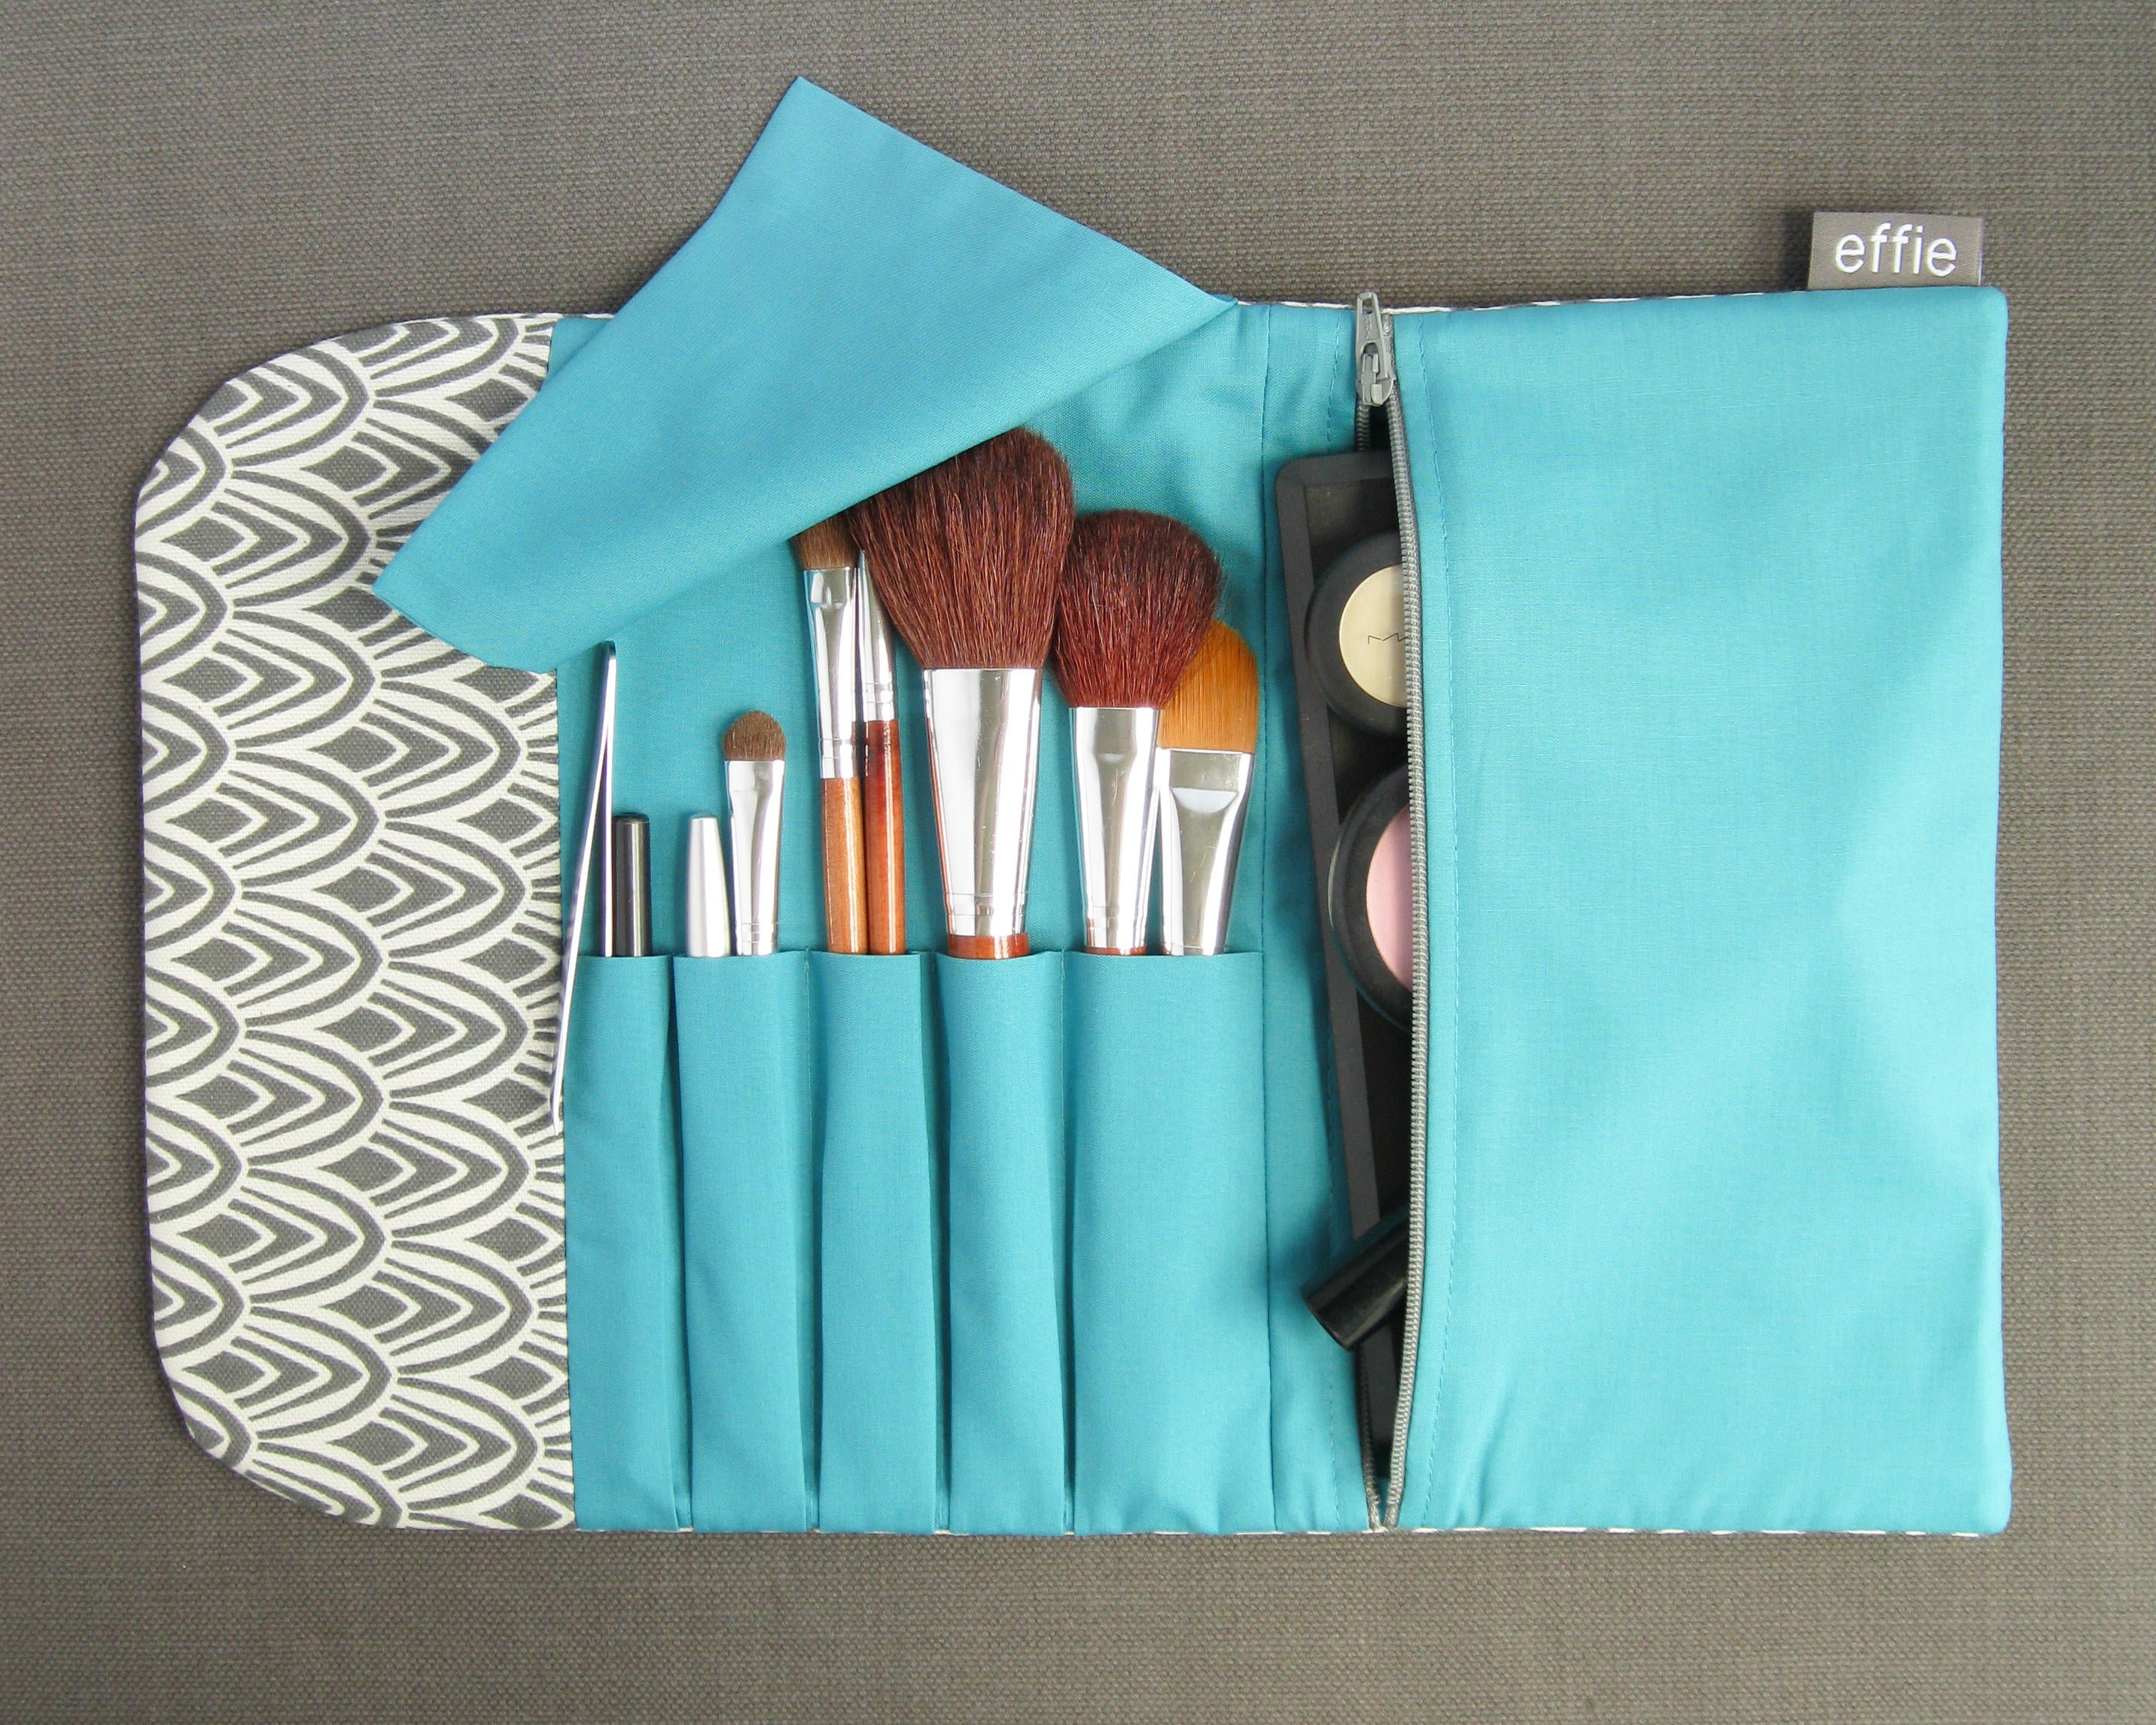 9 Portable Beauty Organizers For Your Essence Festival Travels